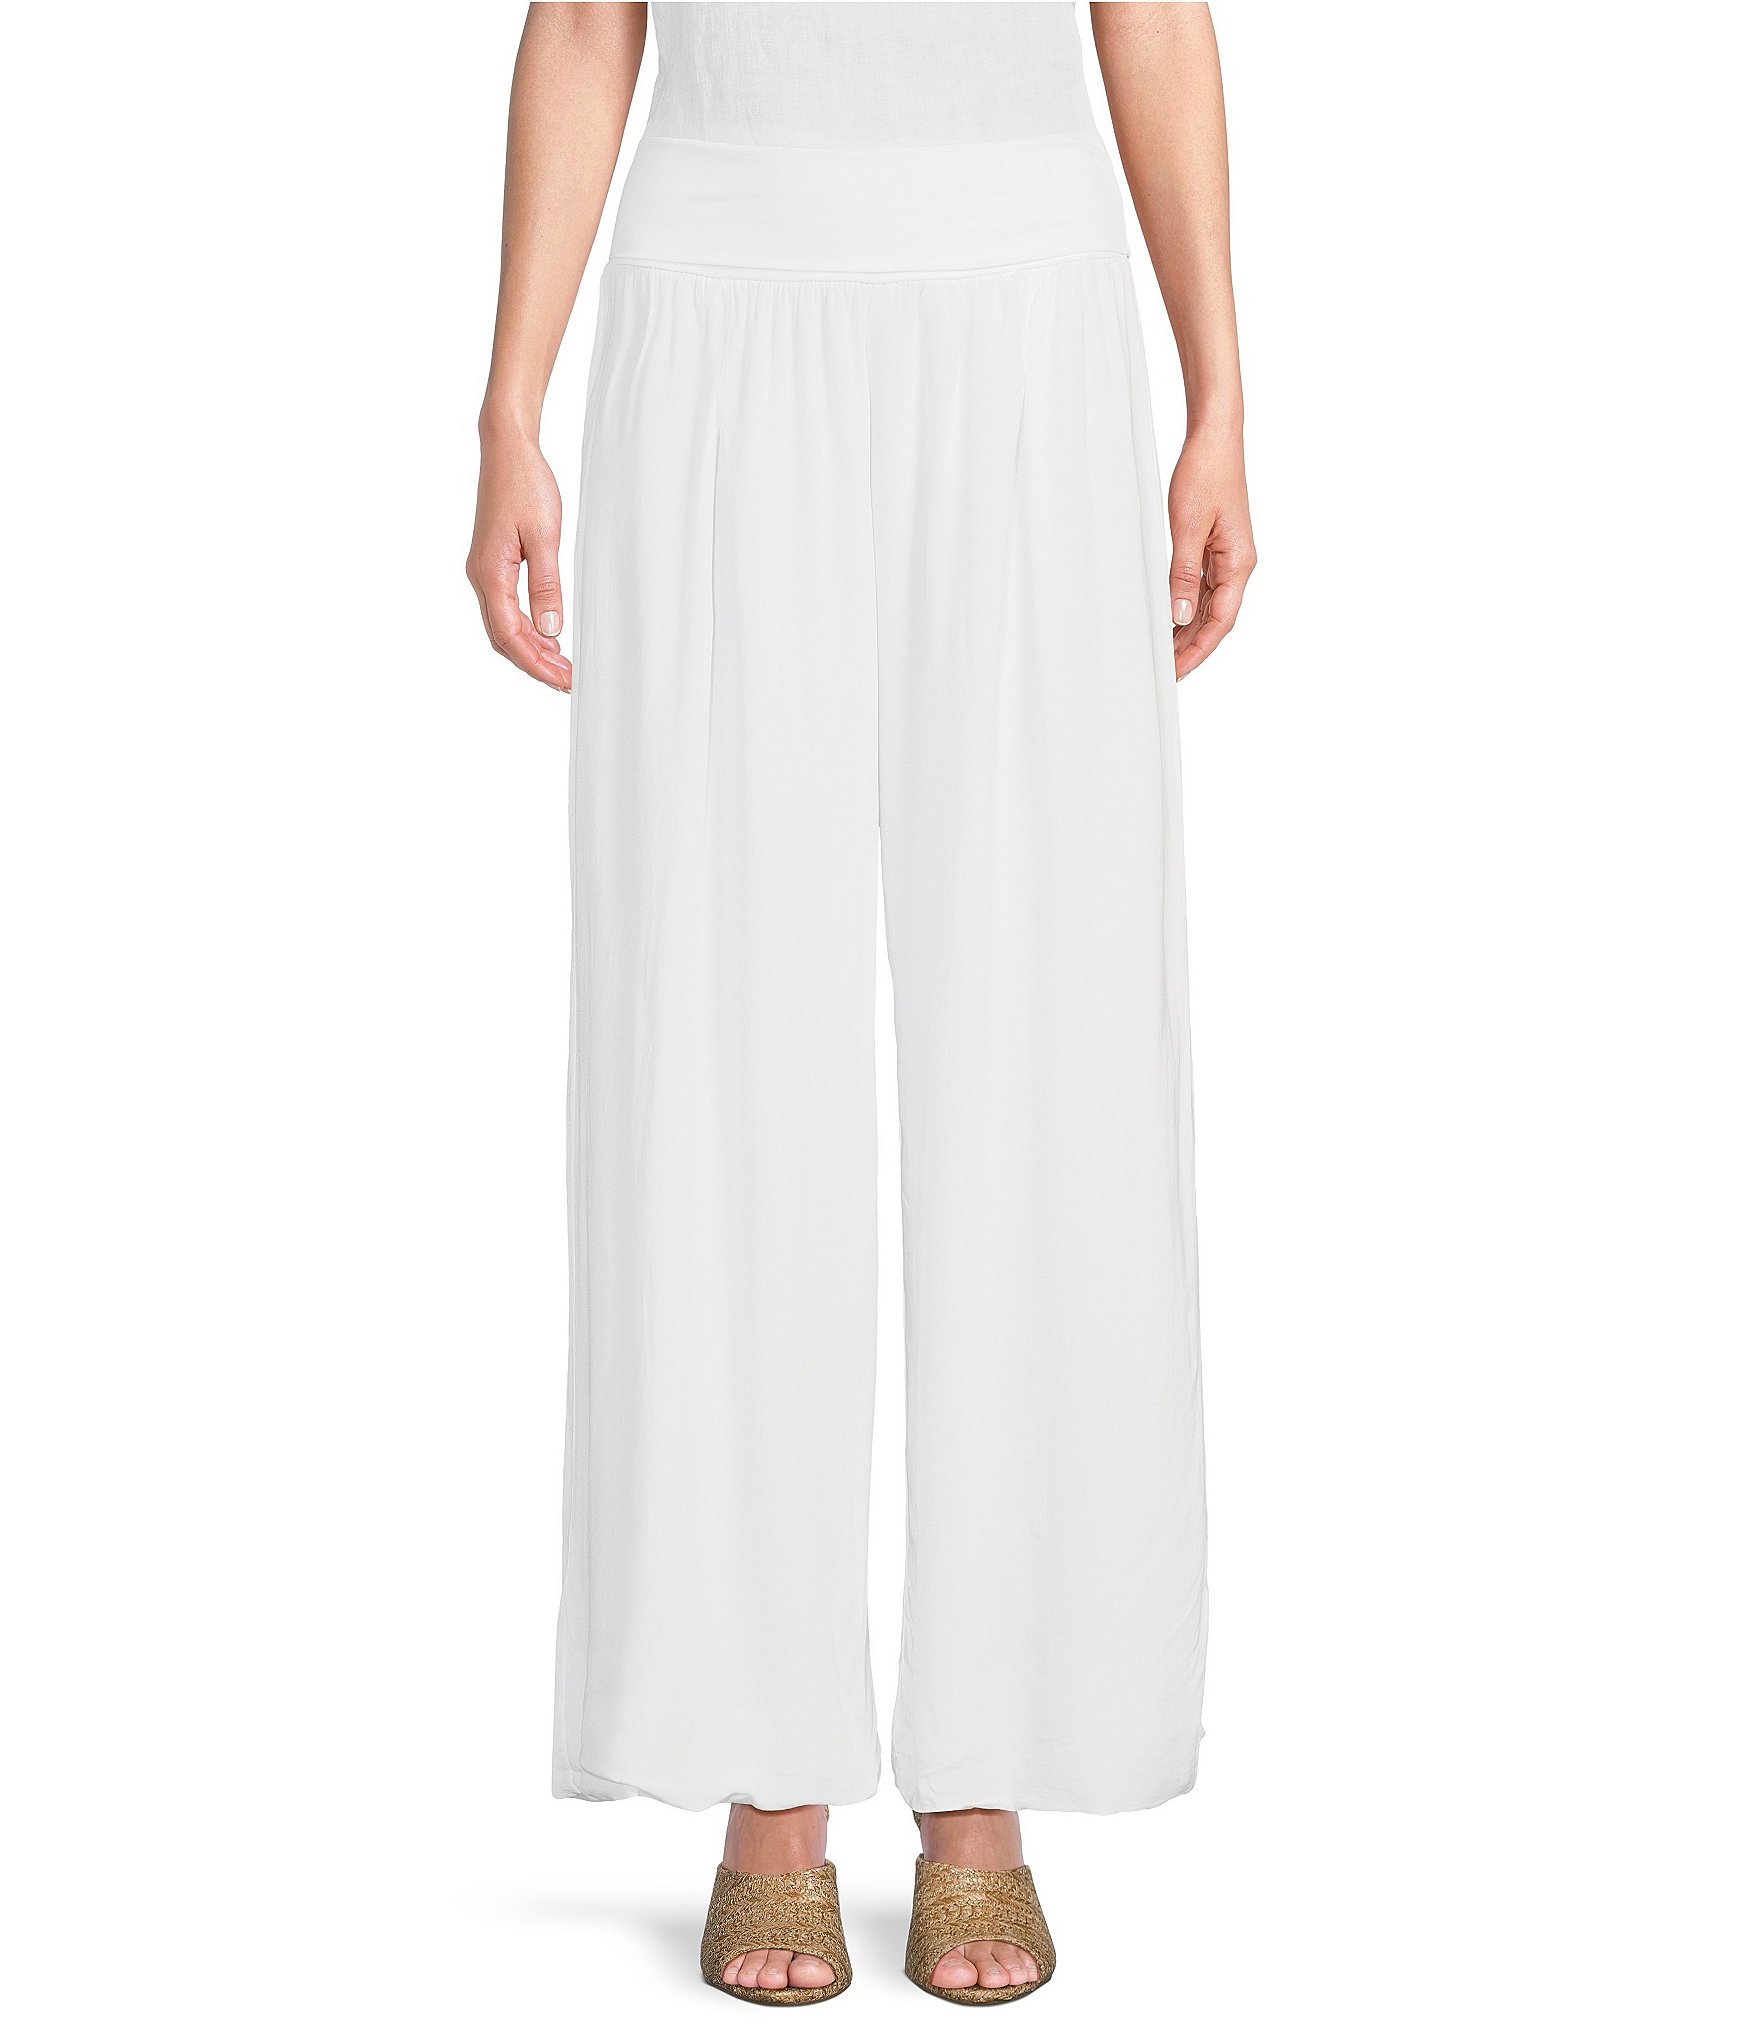 M Made in Italy - Women's Wide Leg Pants with Elastic Waistband – Ema&Carla